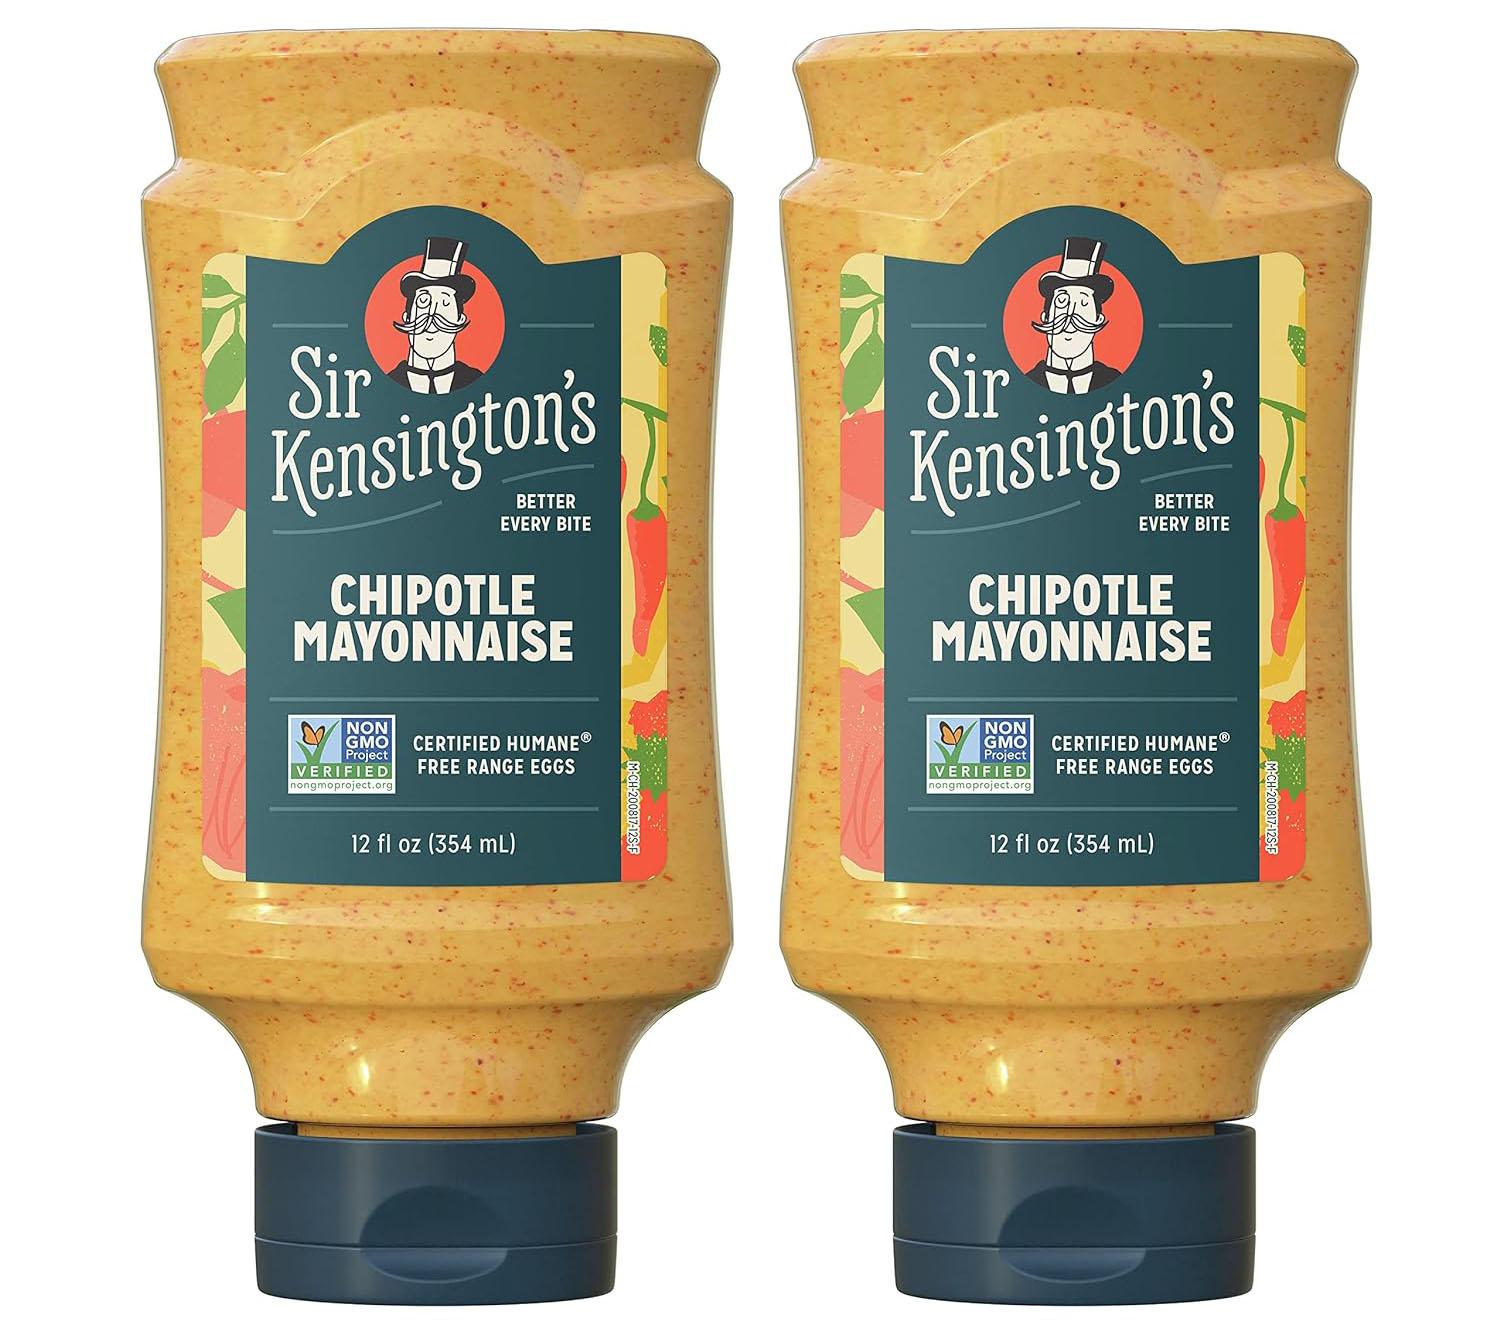 Sir Kensingtons Chipotle Mayonnaise 2 Pack for $4.53